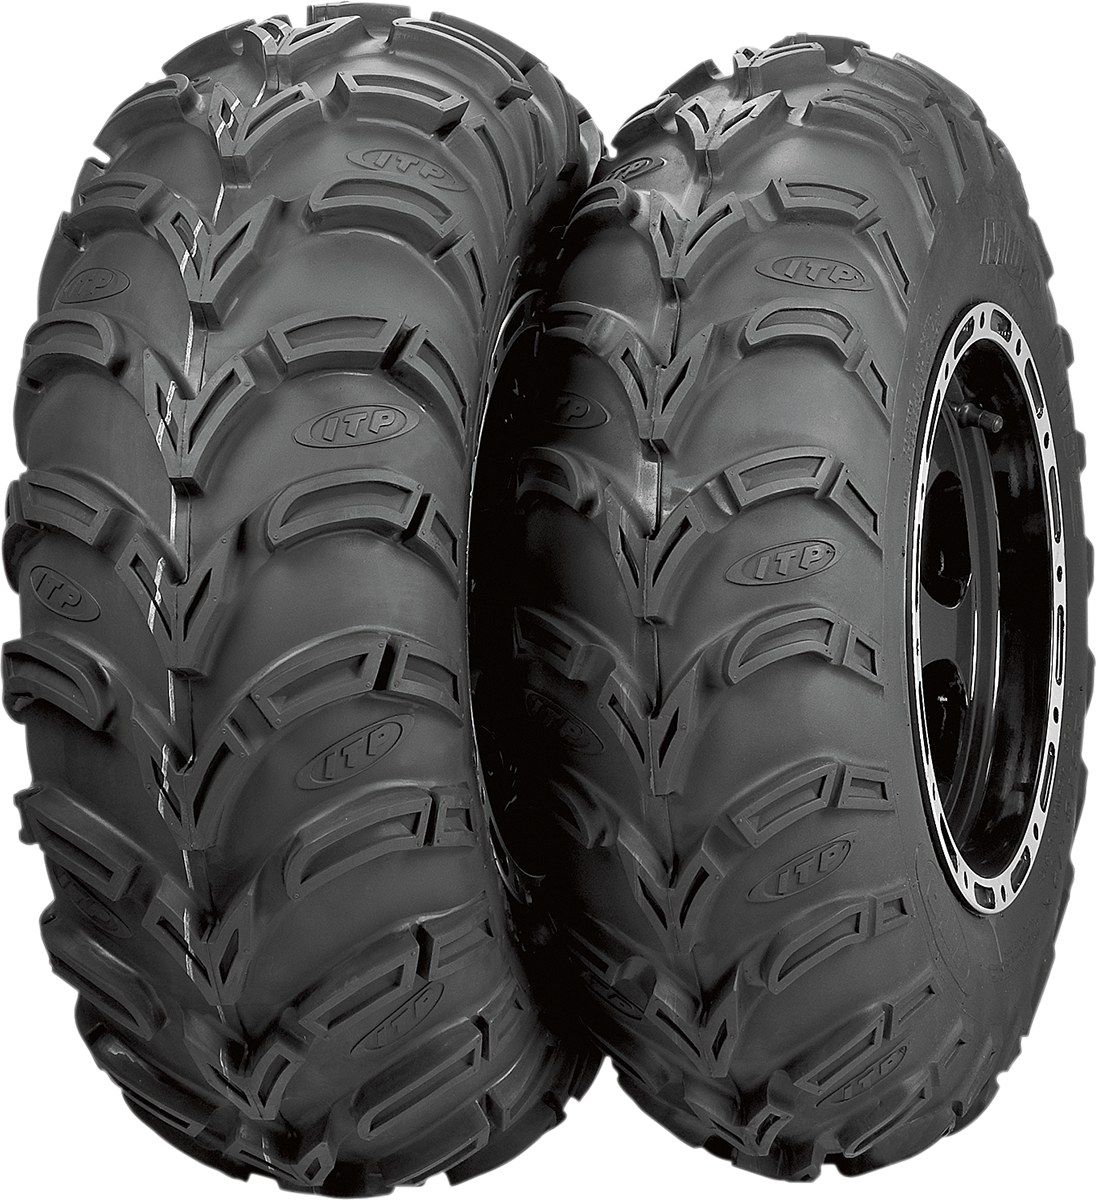 ITP Tire - Mud Lite XL - Front/Rear - 25x12-11 - 6 Ply 560431